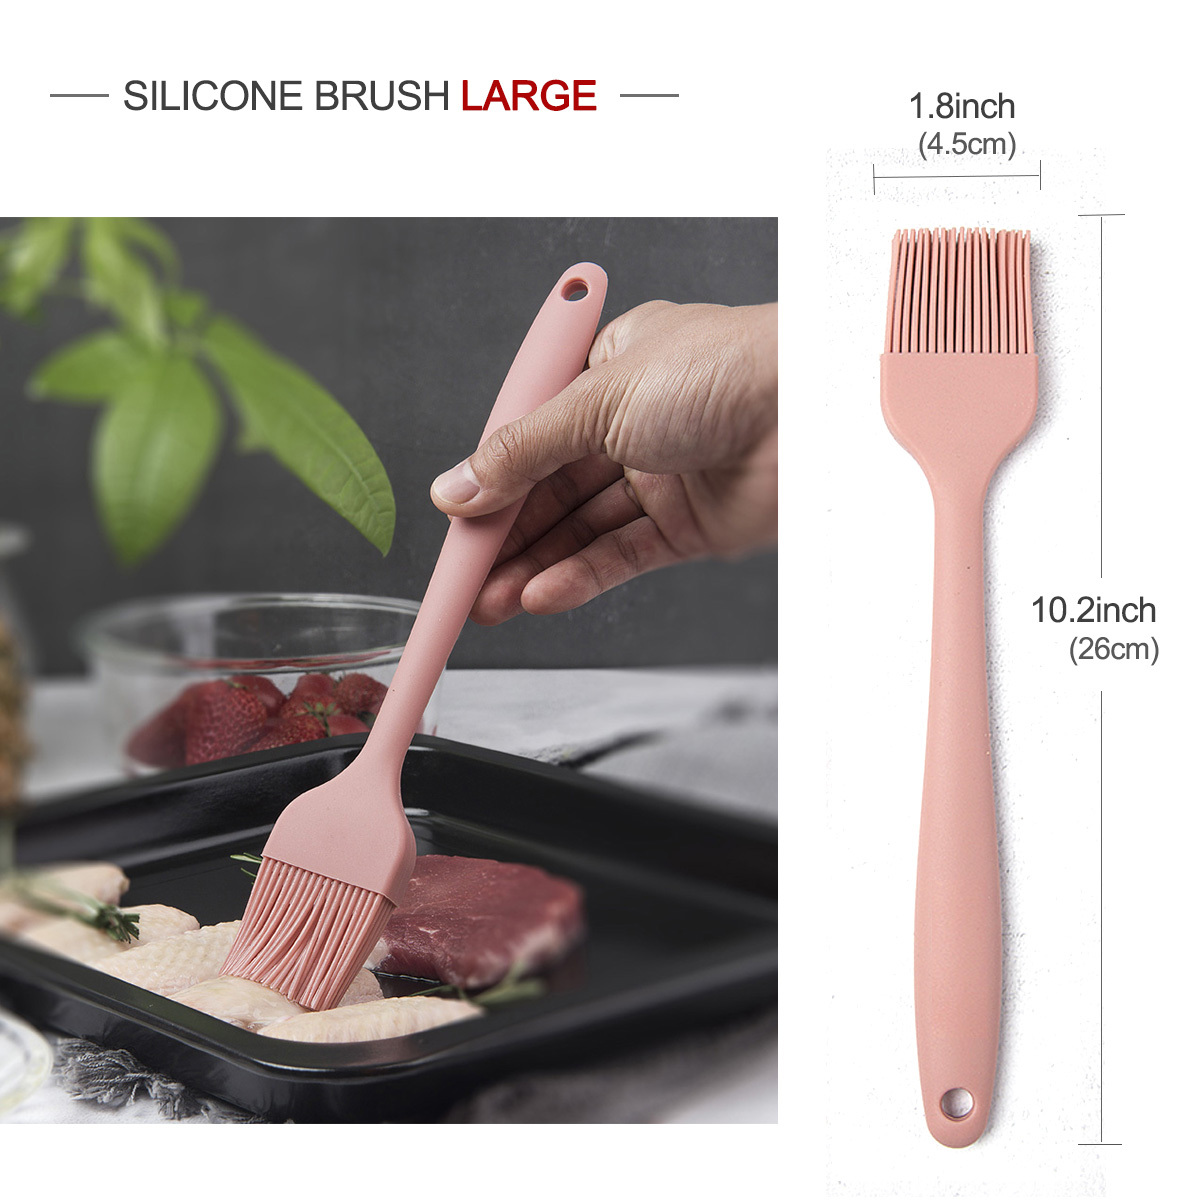 Silicone Basting Brush and Pastry Brush for BBQ, Grilling, Baking & Cooking